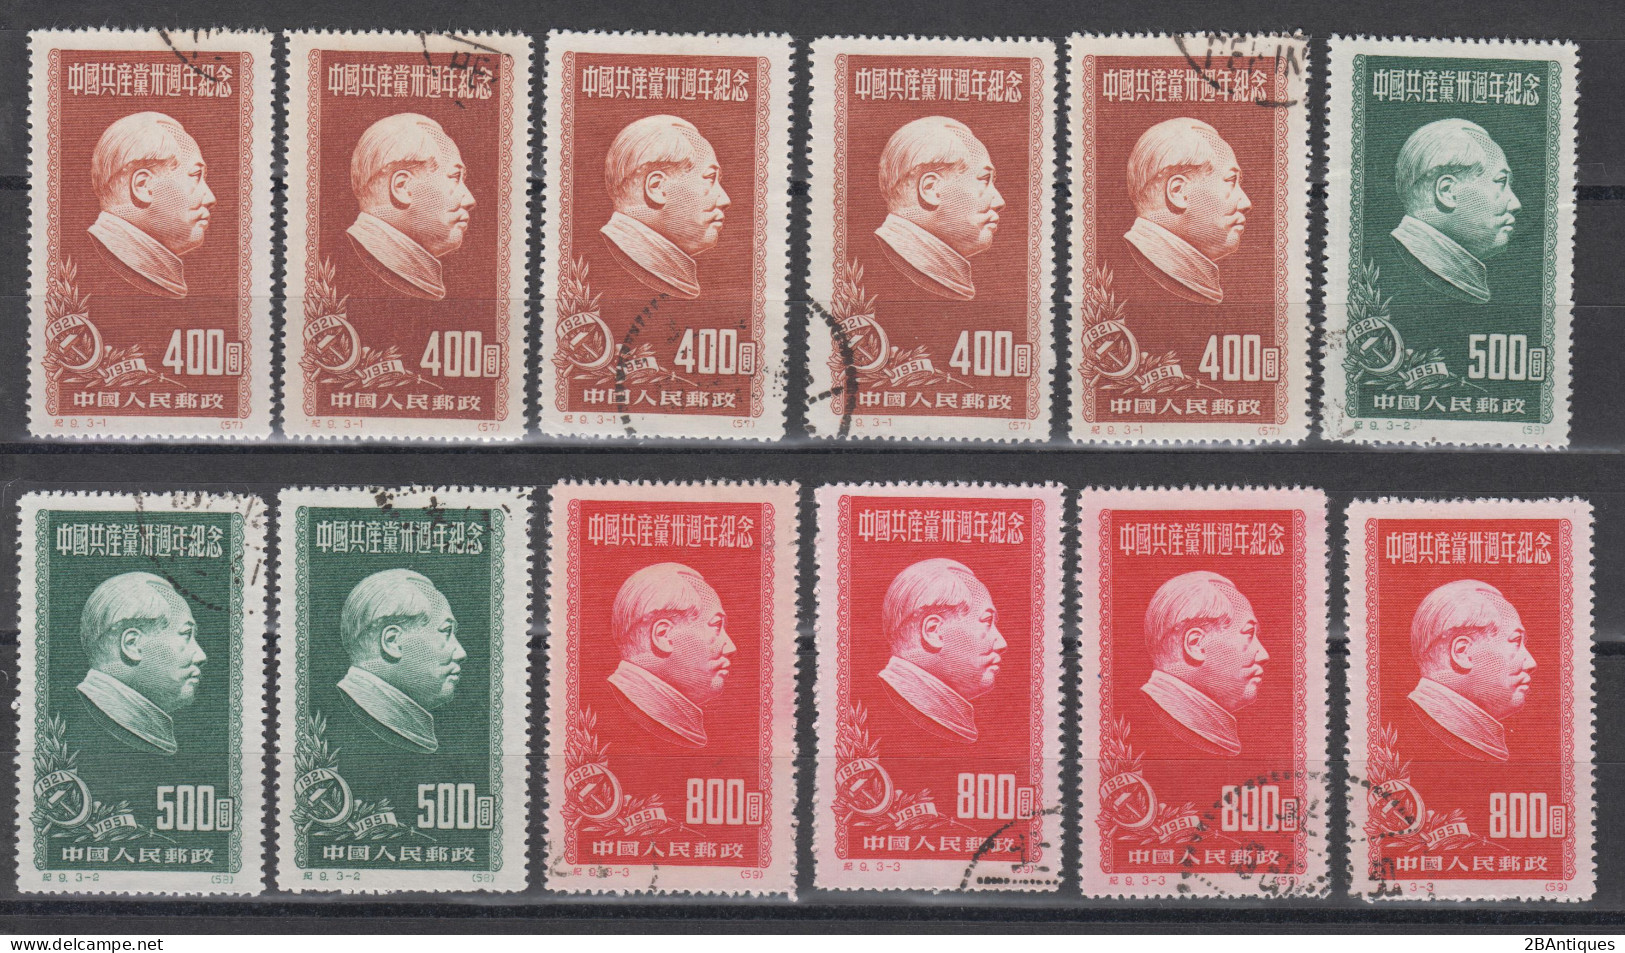 PR CHINA 1951 - The 30th Anniversary Of The Communist Party Of China - Mao Zedong CTO 12 Stamps - Usados